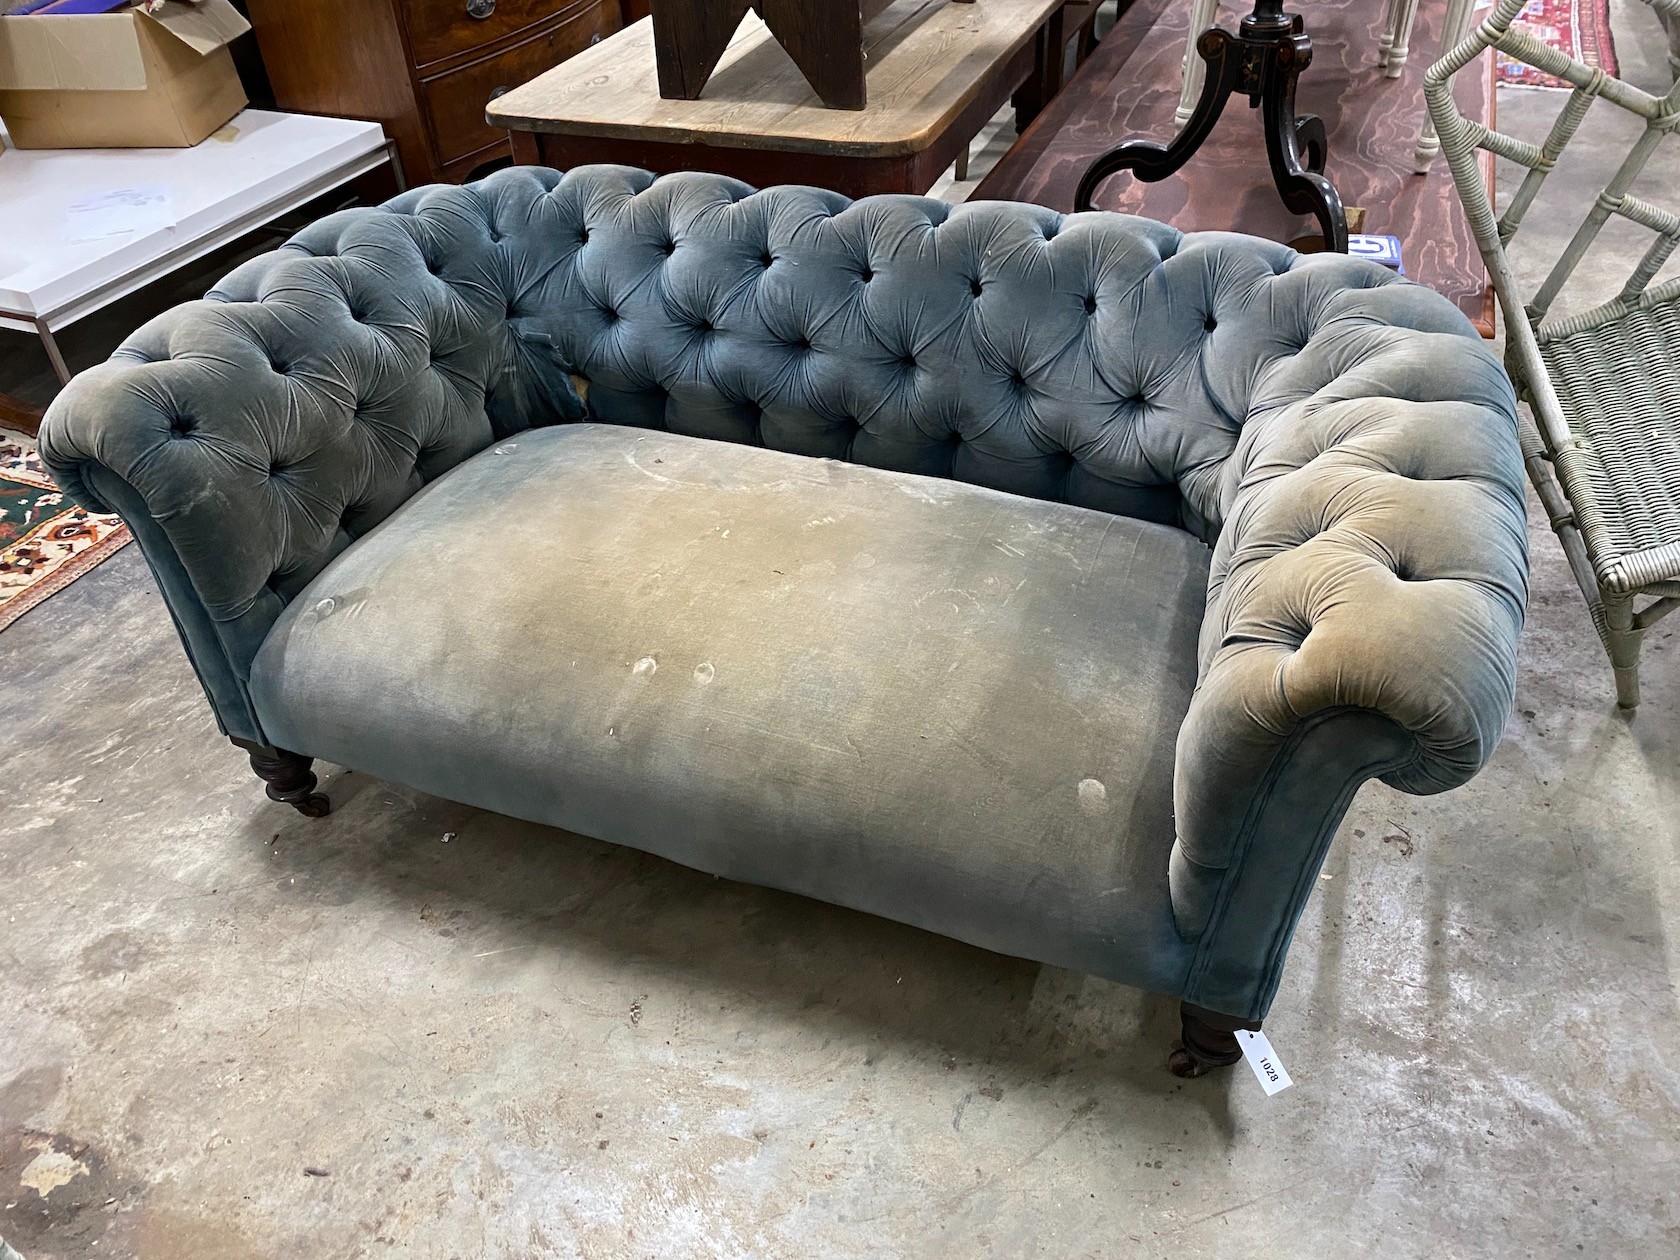 A late Victorian Chesterfield settee upholstered in buttoned blue fabric, length 160cm, depth 86cm, height 66cm